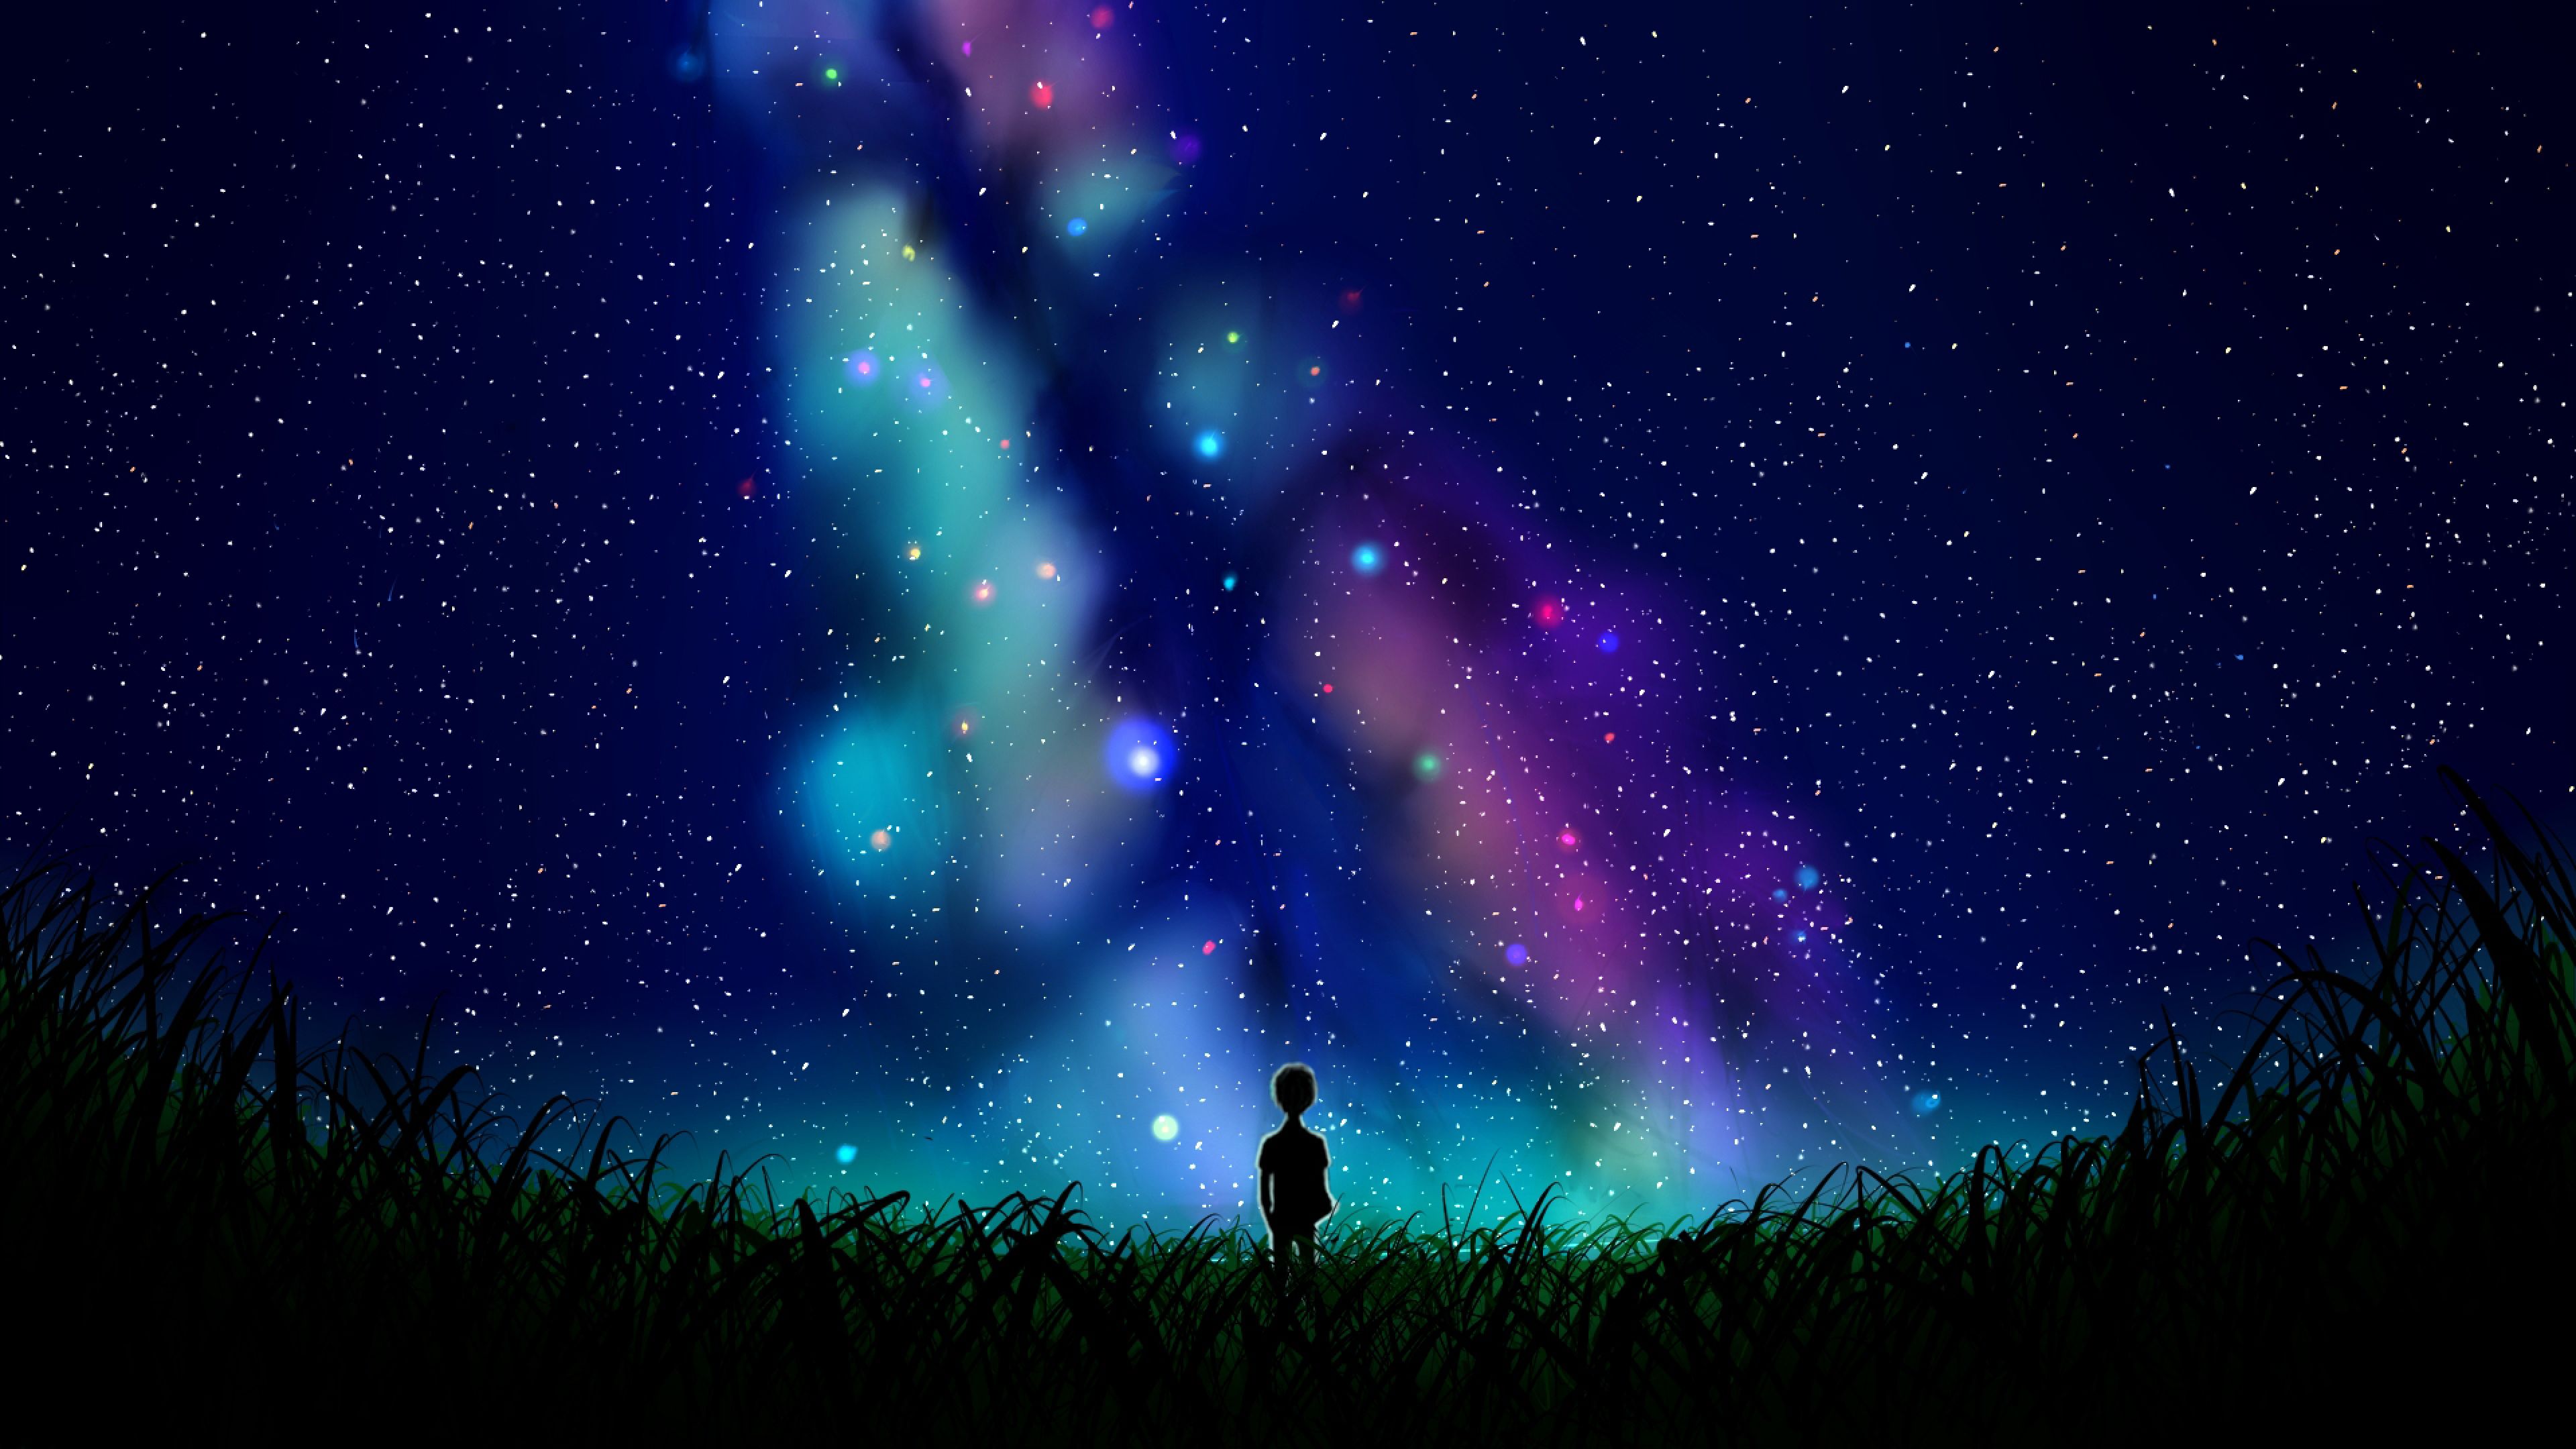 Alone In The Universe Art 4K Wallpaper, HD Artist 4K Wallpaper, Image, Photo and Background